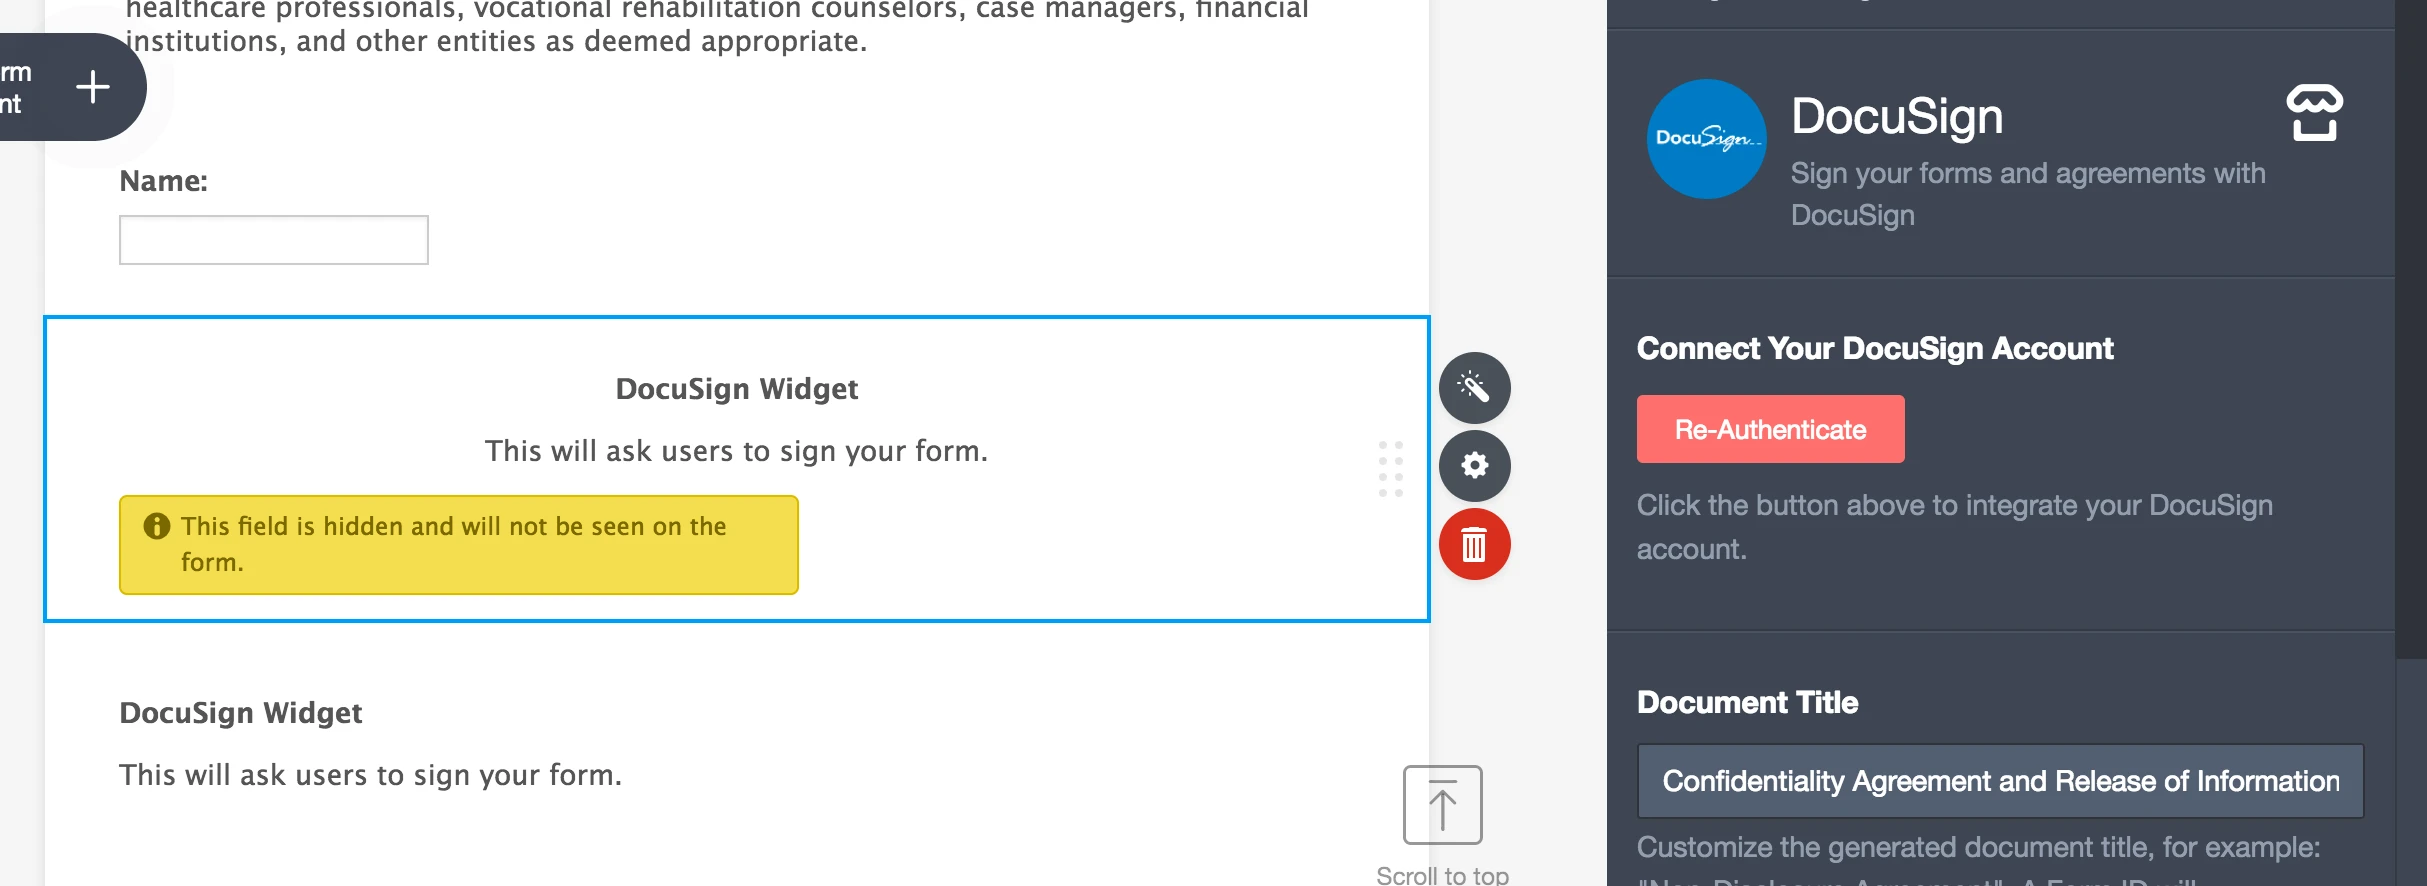 Why do I have to constantly update the DocuSign widget app? Image 1 Screenshot 20